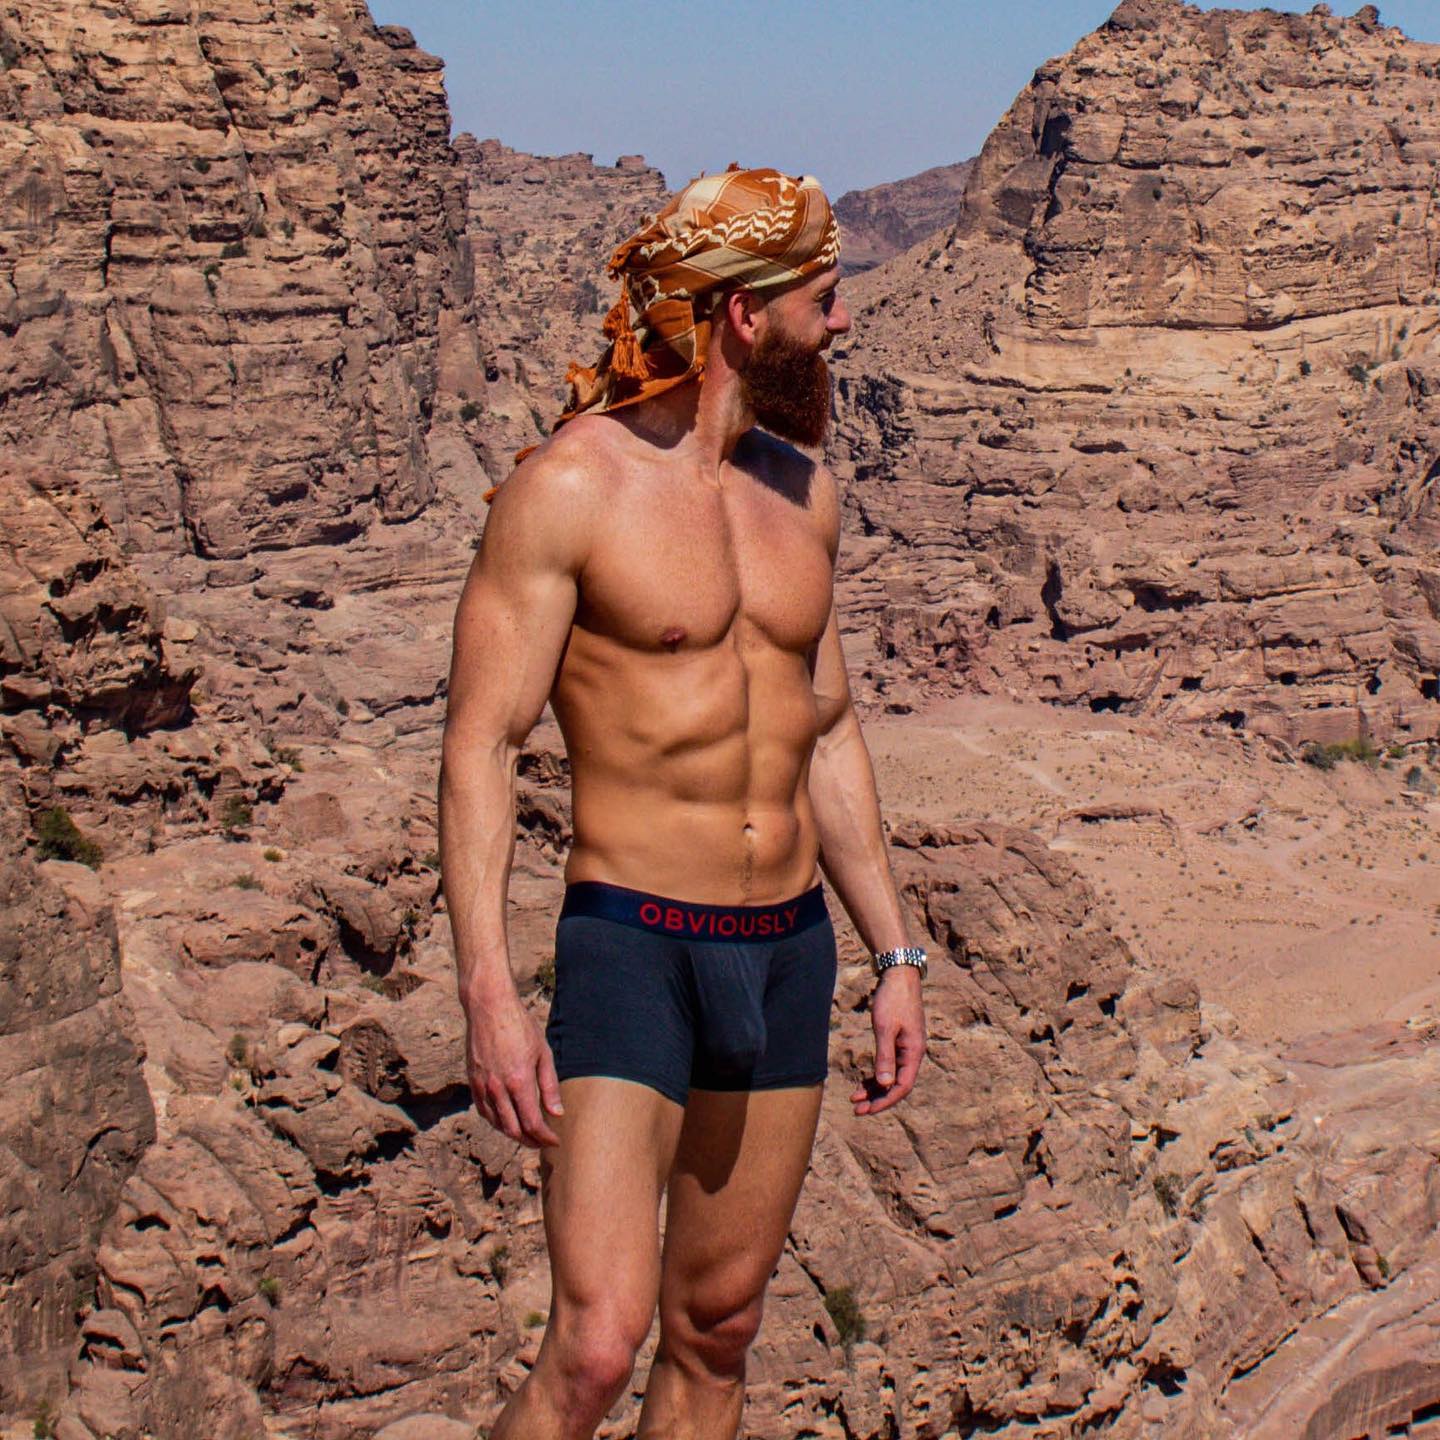 The FreeMan Trunks of Obviously feature the AnatoFREE anatomical shape pouch designed specifically for the male anatomy and are made from the highest quality bamboo rayon mix 4-way stretch fabric! Check it out:
_____
menandunderwear.com/shop